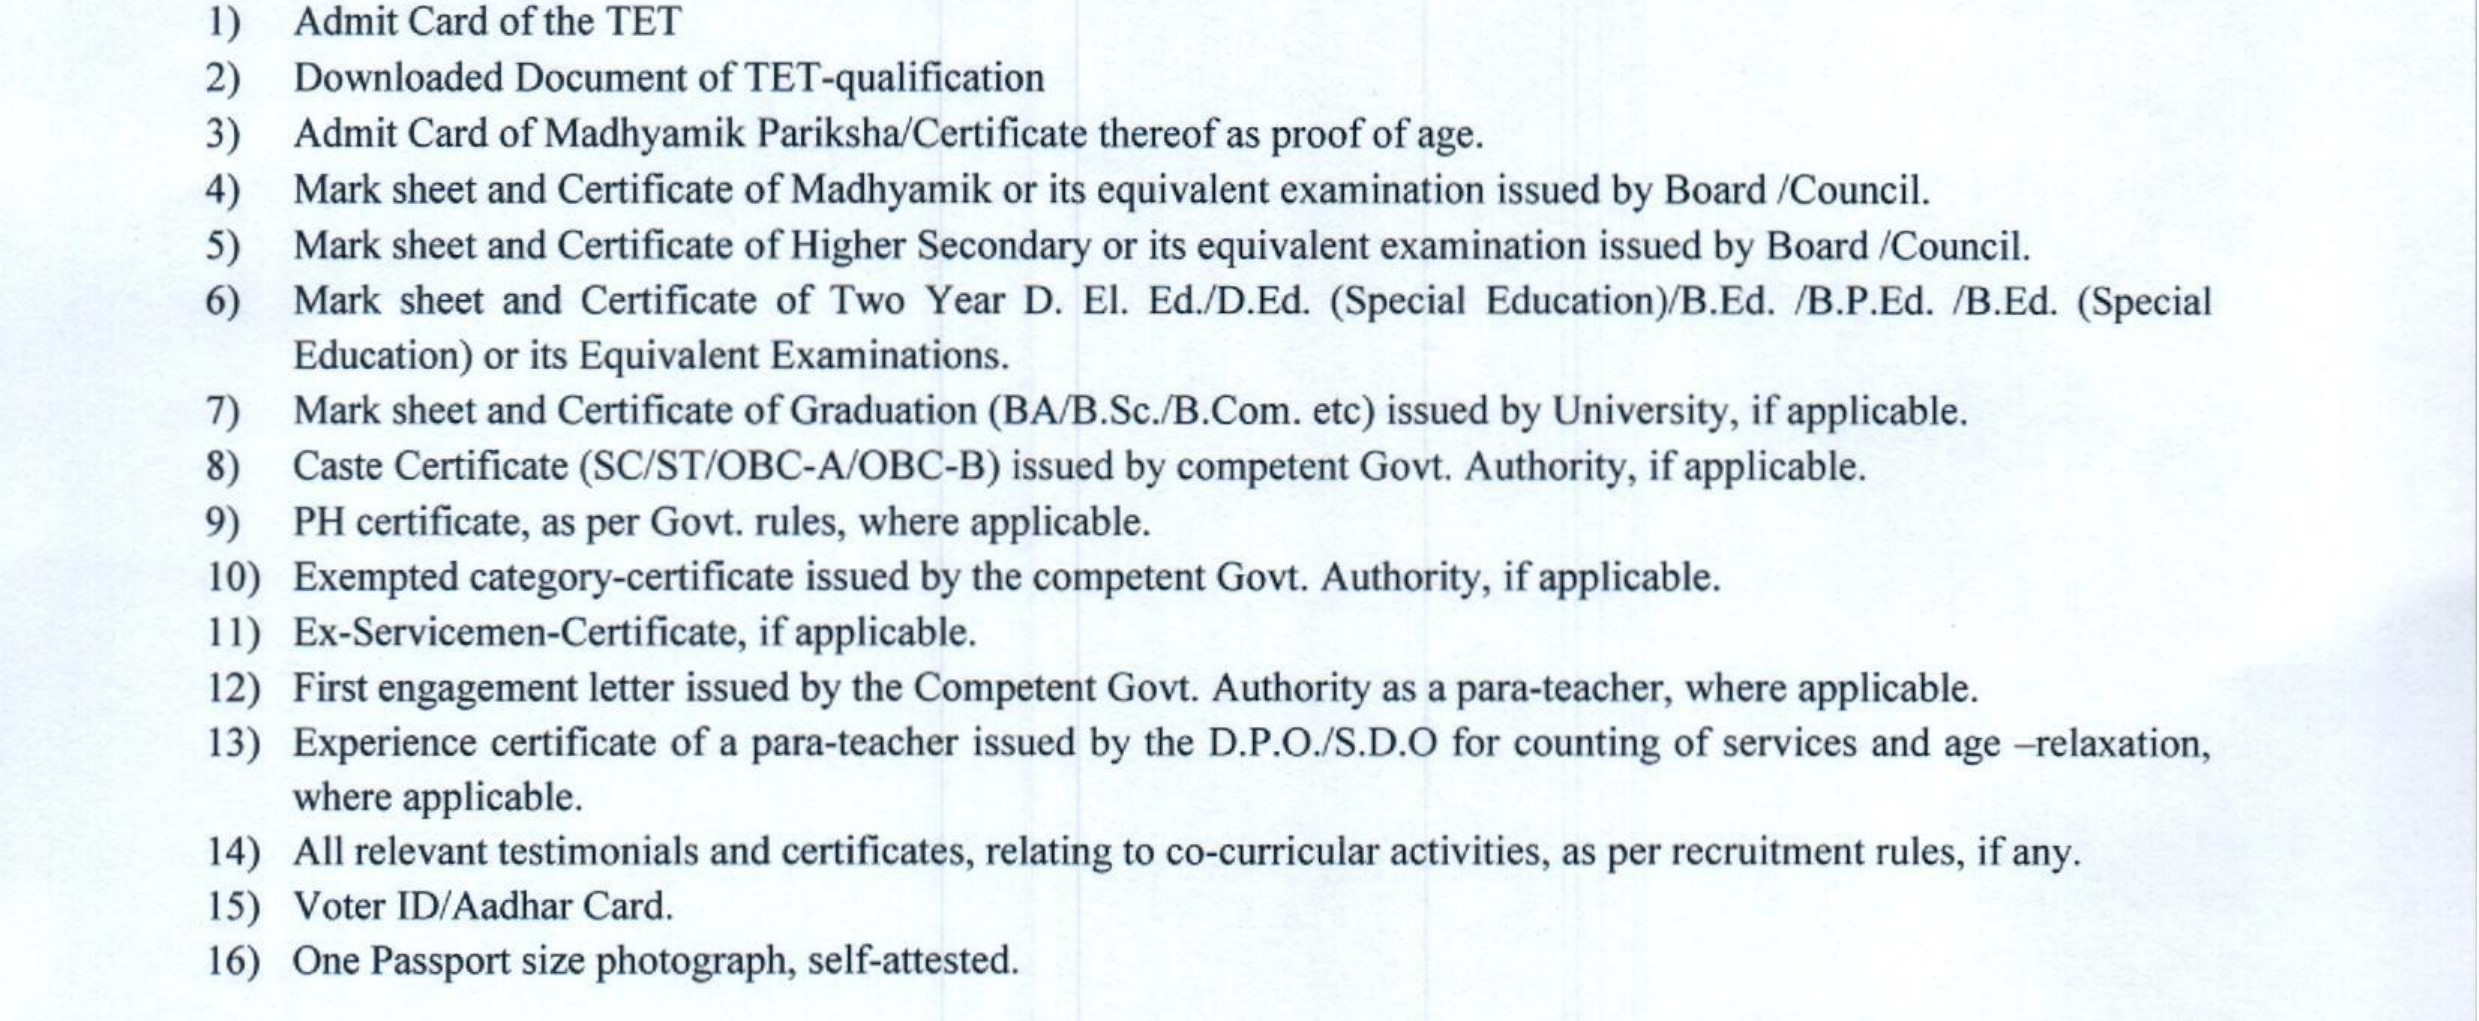 Primary TET Interview Date